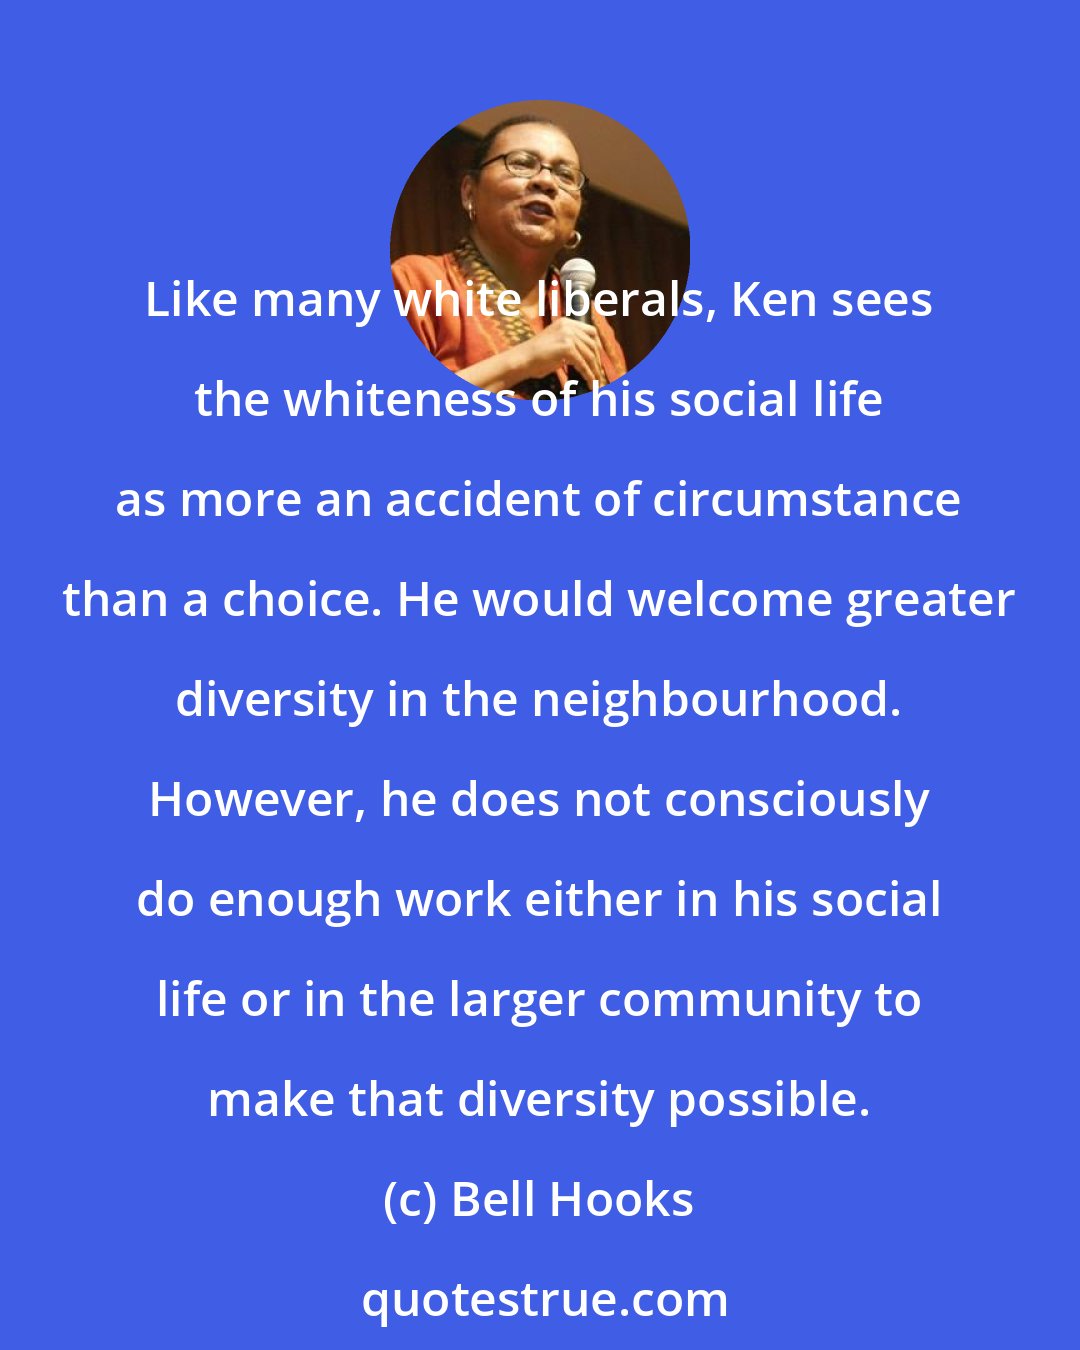 Bell Hooks: Like many white liberals, Ken sees the whiteness of his social life as more an accident of circumstance than a choice. He would welcome greater diversity in the neighbourhood. However, he does not consciously do enough work either in his social life or in the larger community to make that diversity possible.